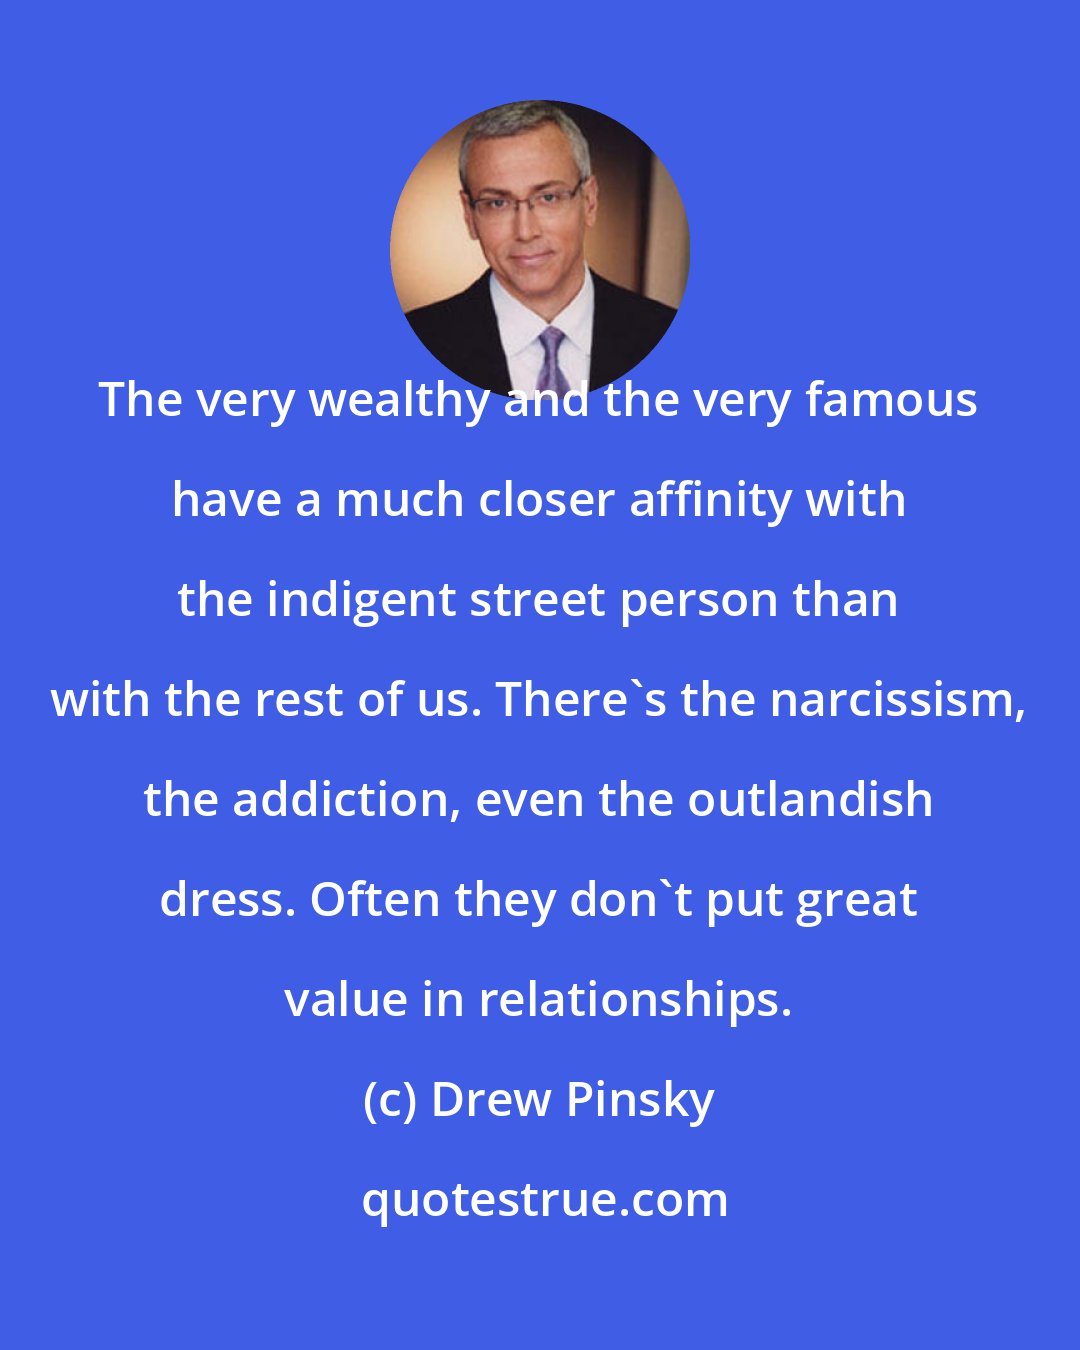 Drew Pinsky: The very wealthy and the very famous have a much closer affinity with the indigent street person than with the rest of us. There's the narcissism, the addiction, even the outlandish dress. Often they don't put great value in relationships.